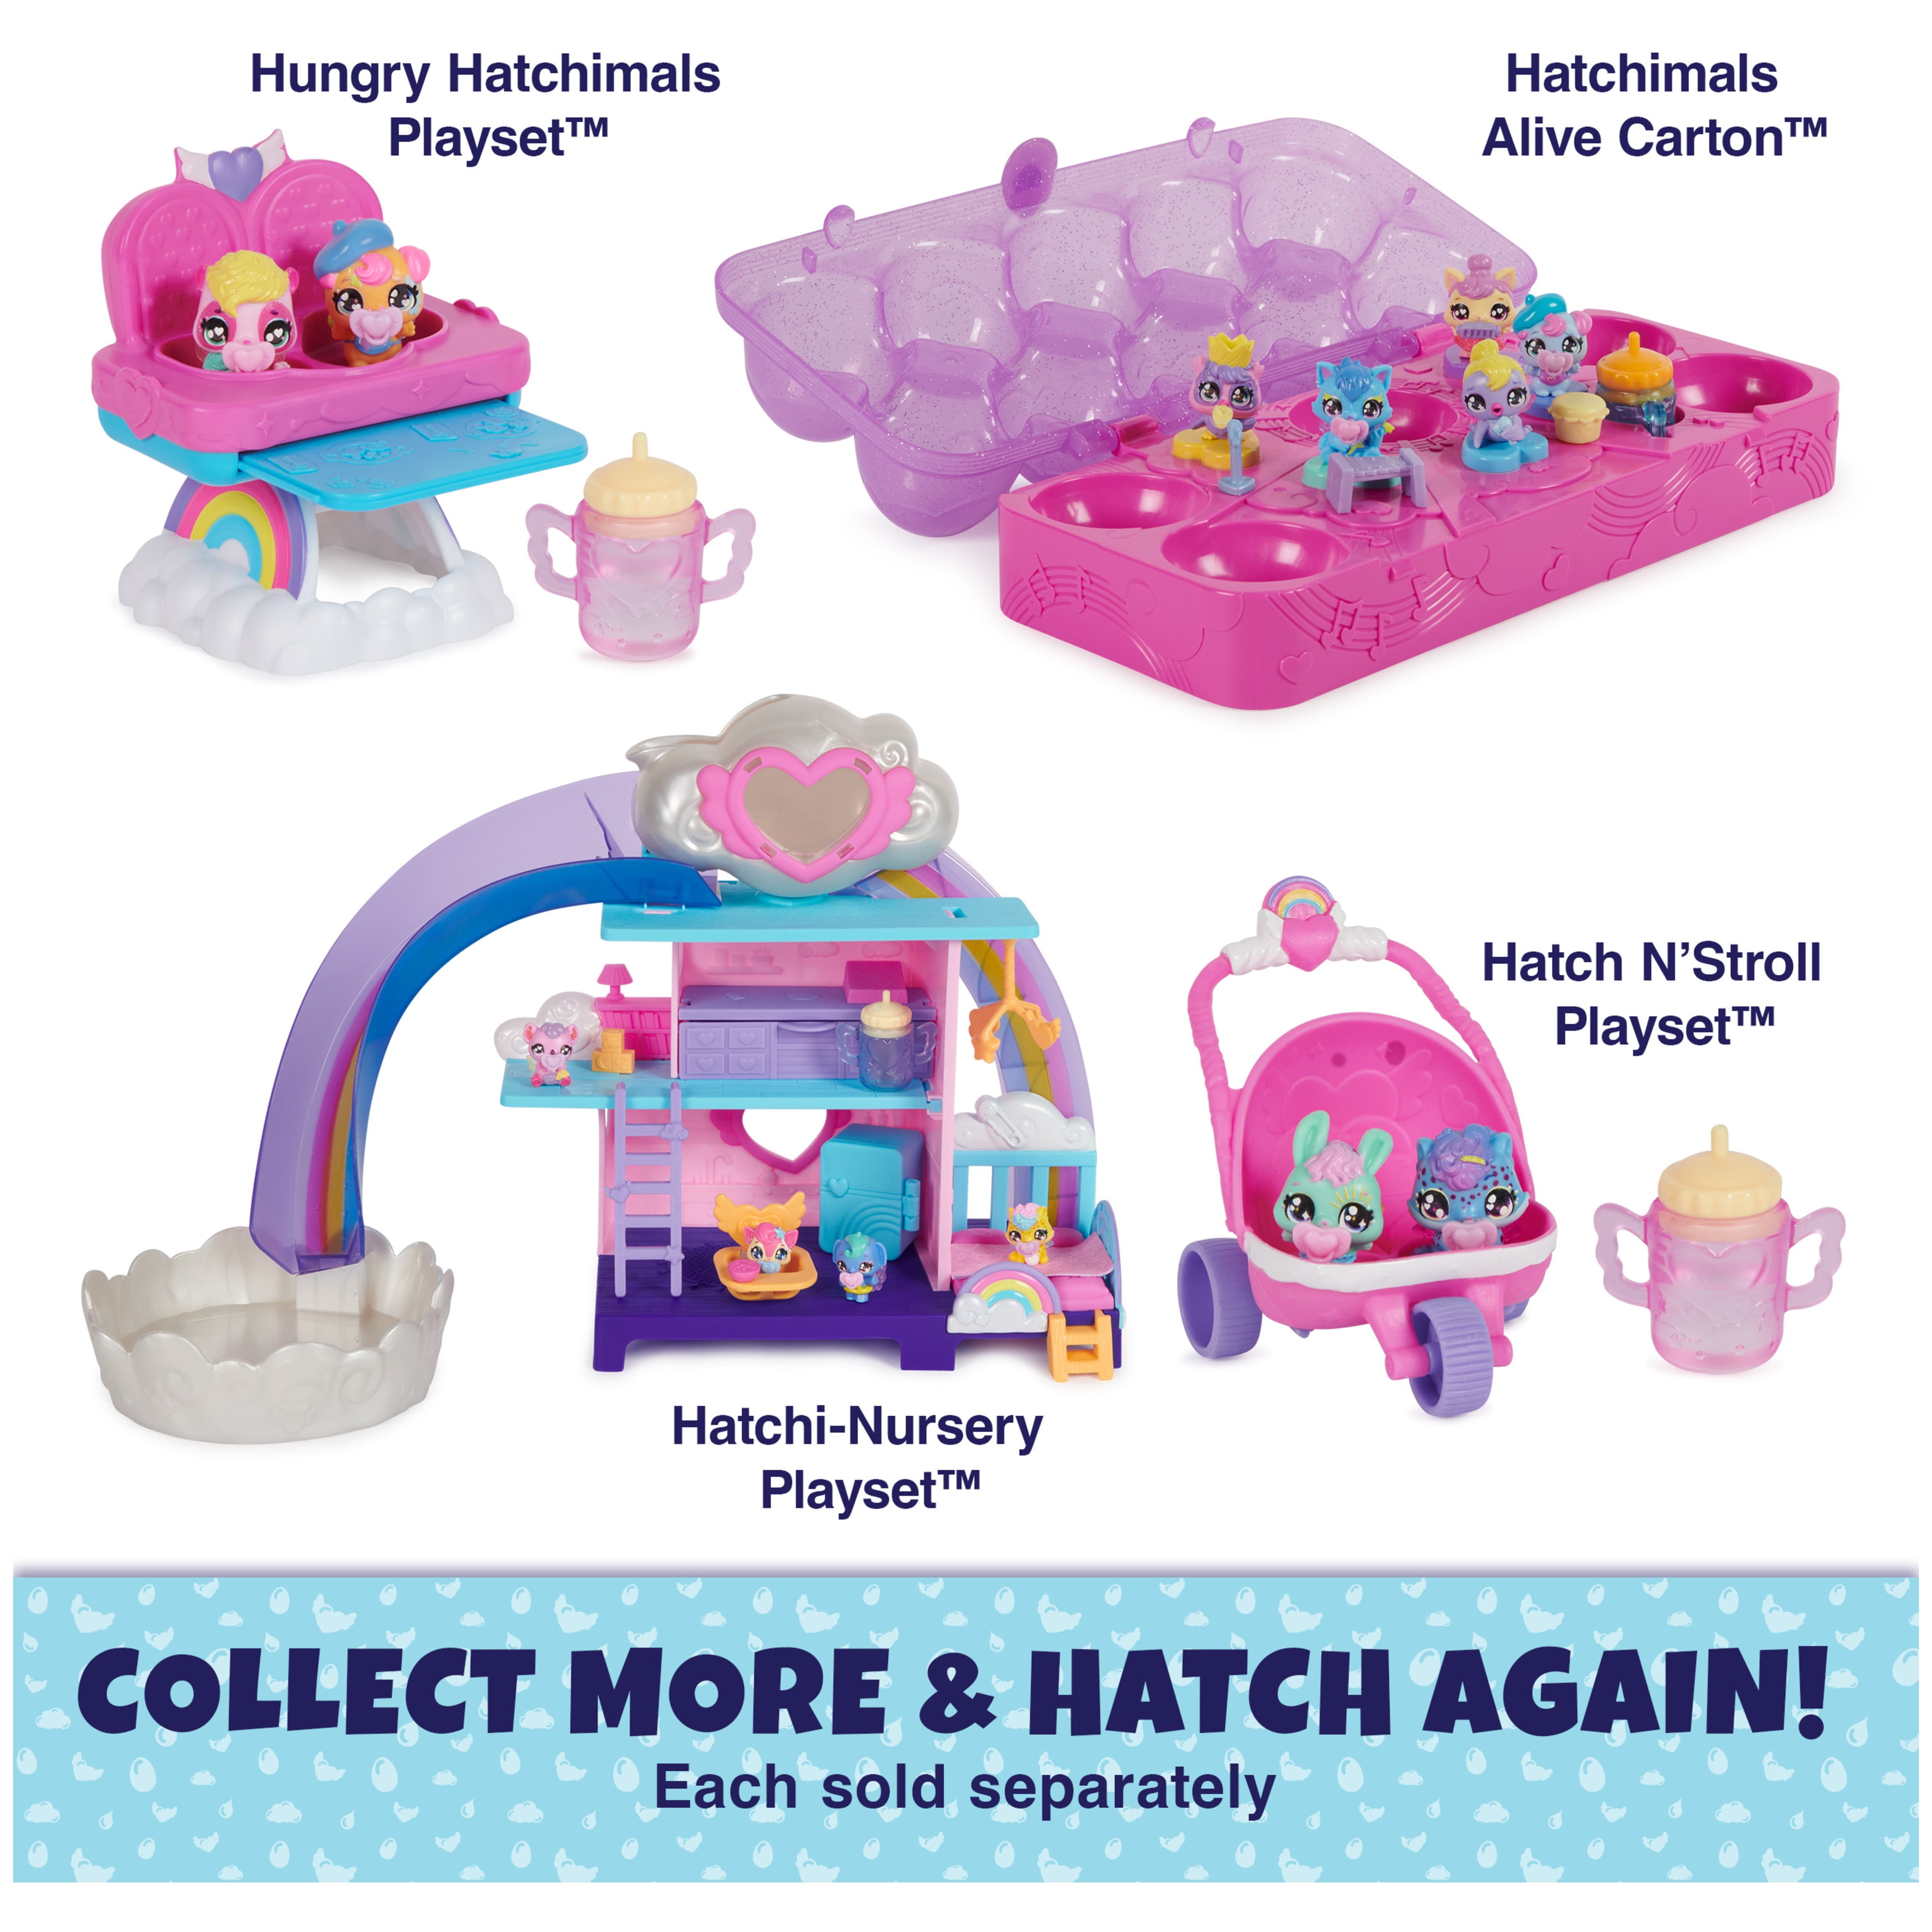 Hatchimals Alive Family Carton  Toys for girls, Hatchimals, Hatchimals toy